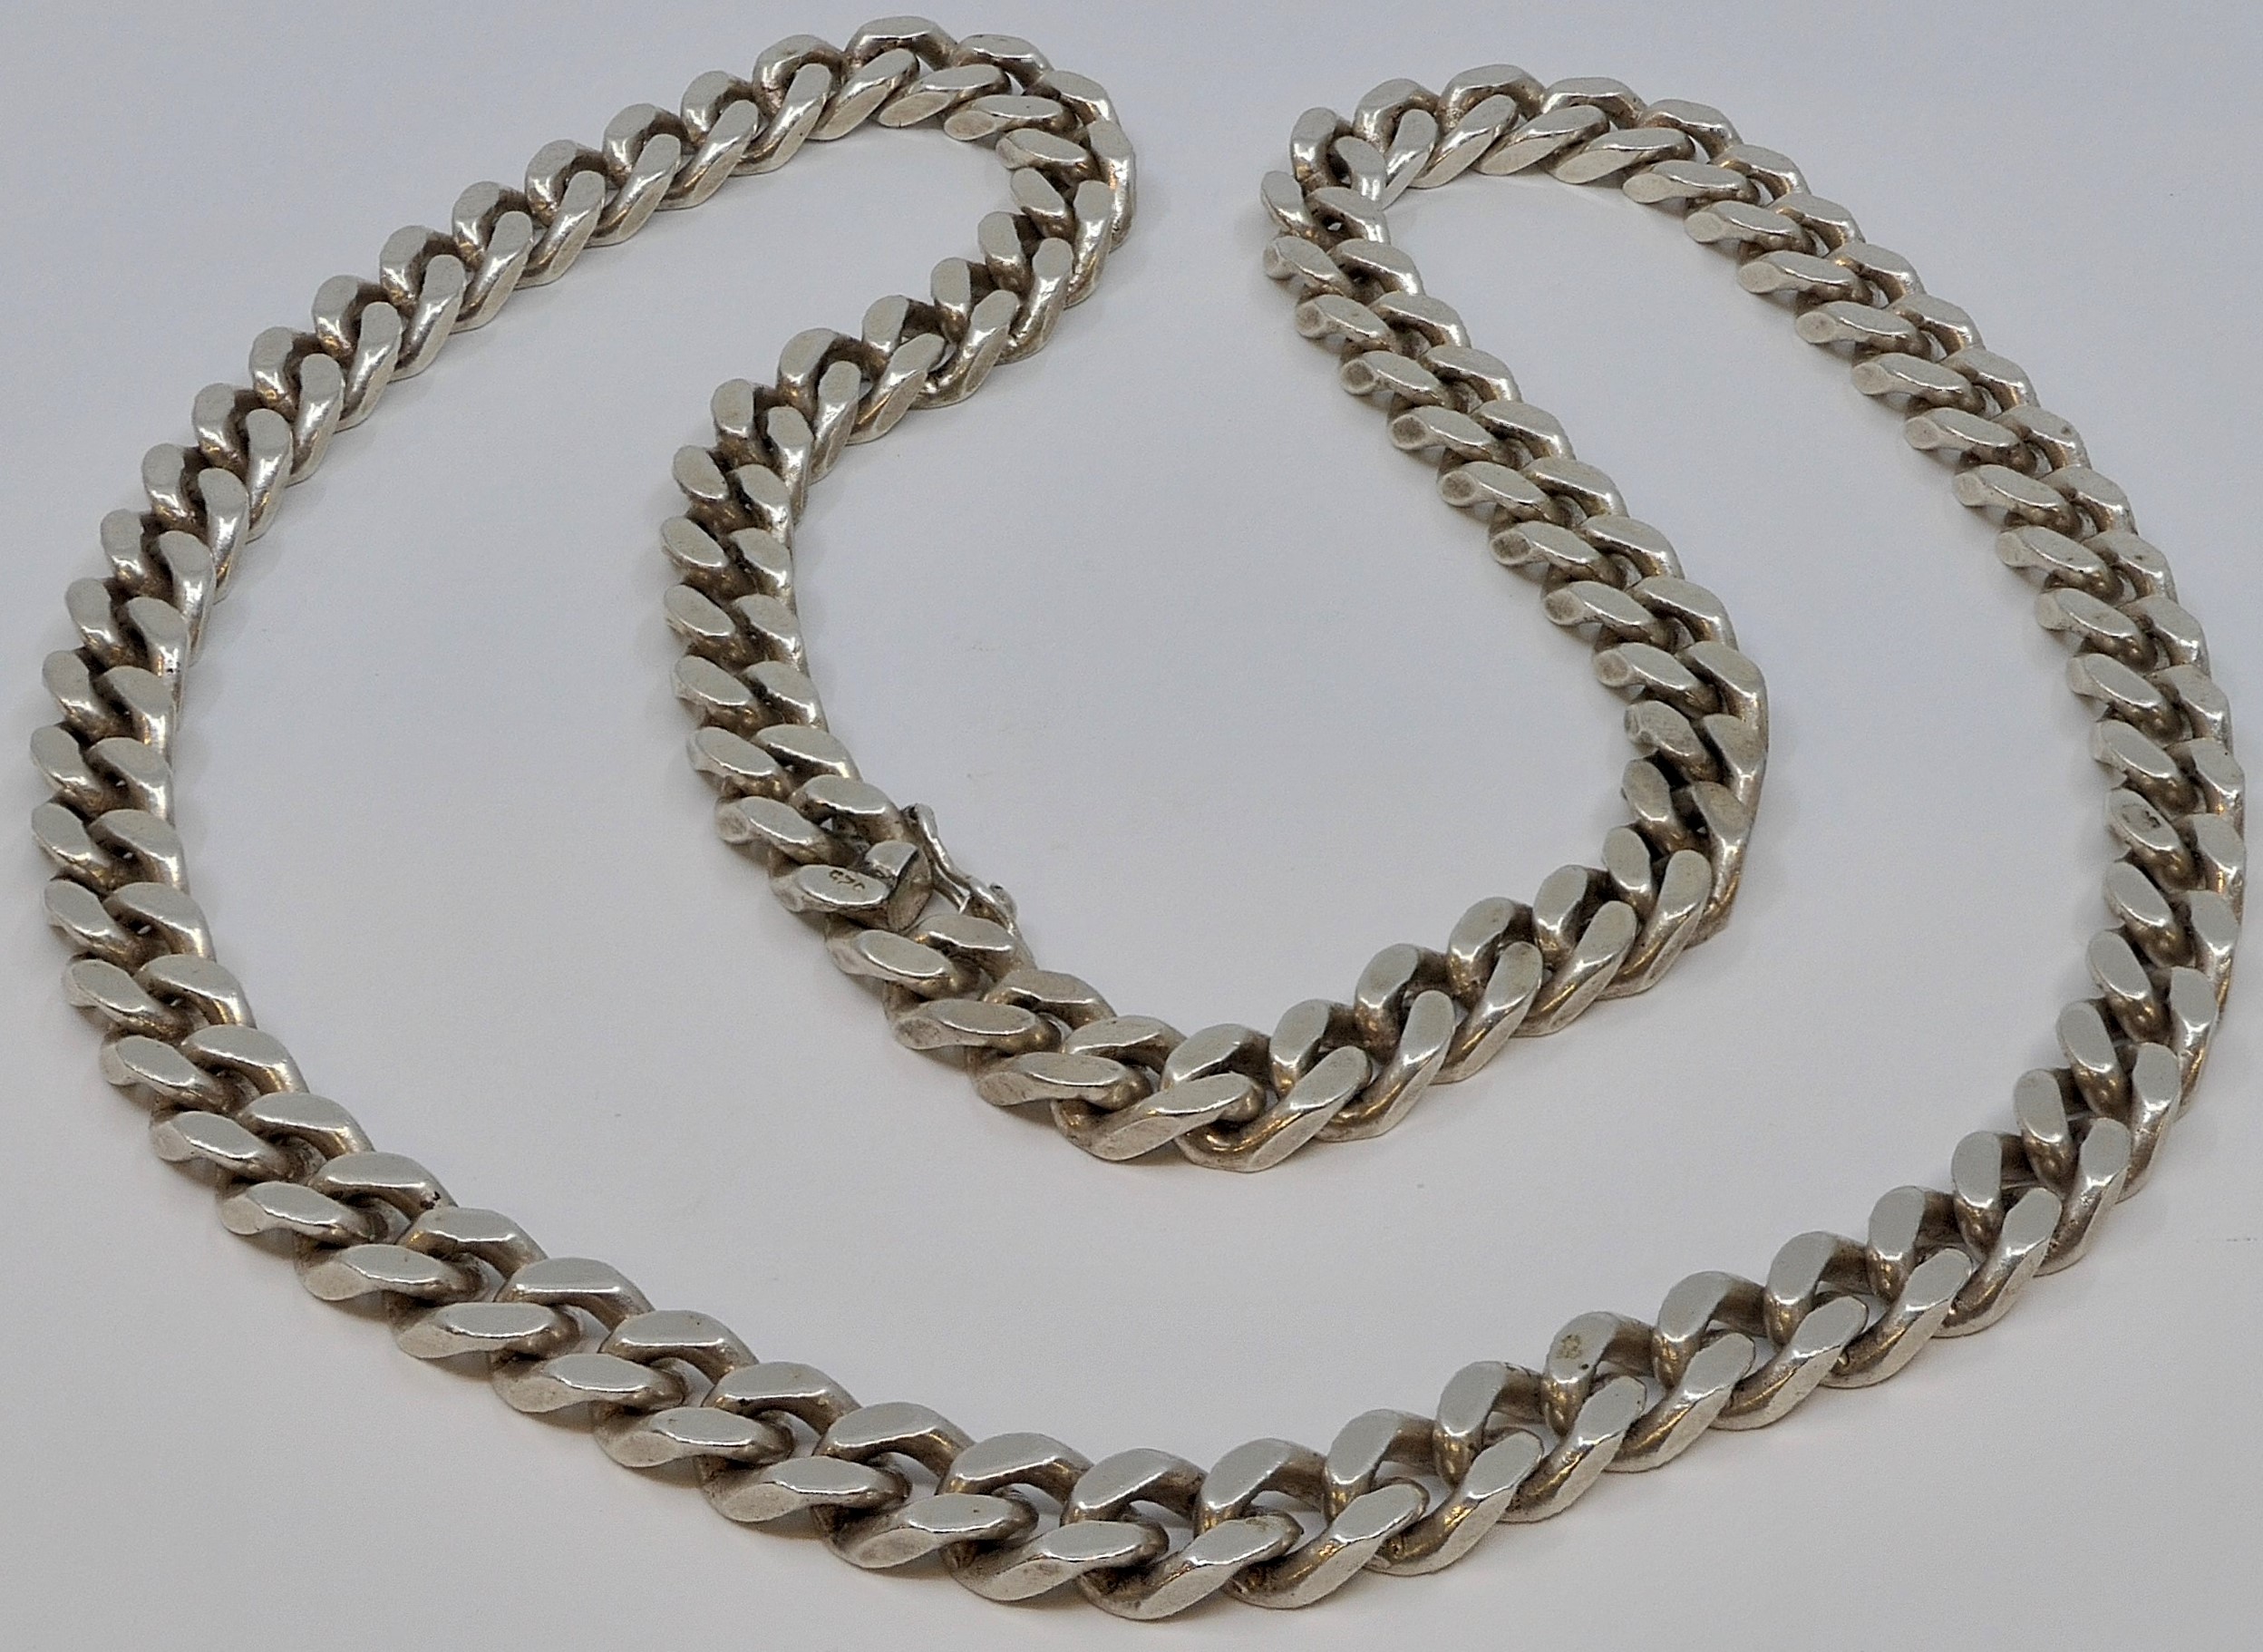 Chunky 925 white metal gent's neck chain, length about 58cm, 3.1 ozt, stamped 925 and import marks